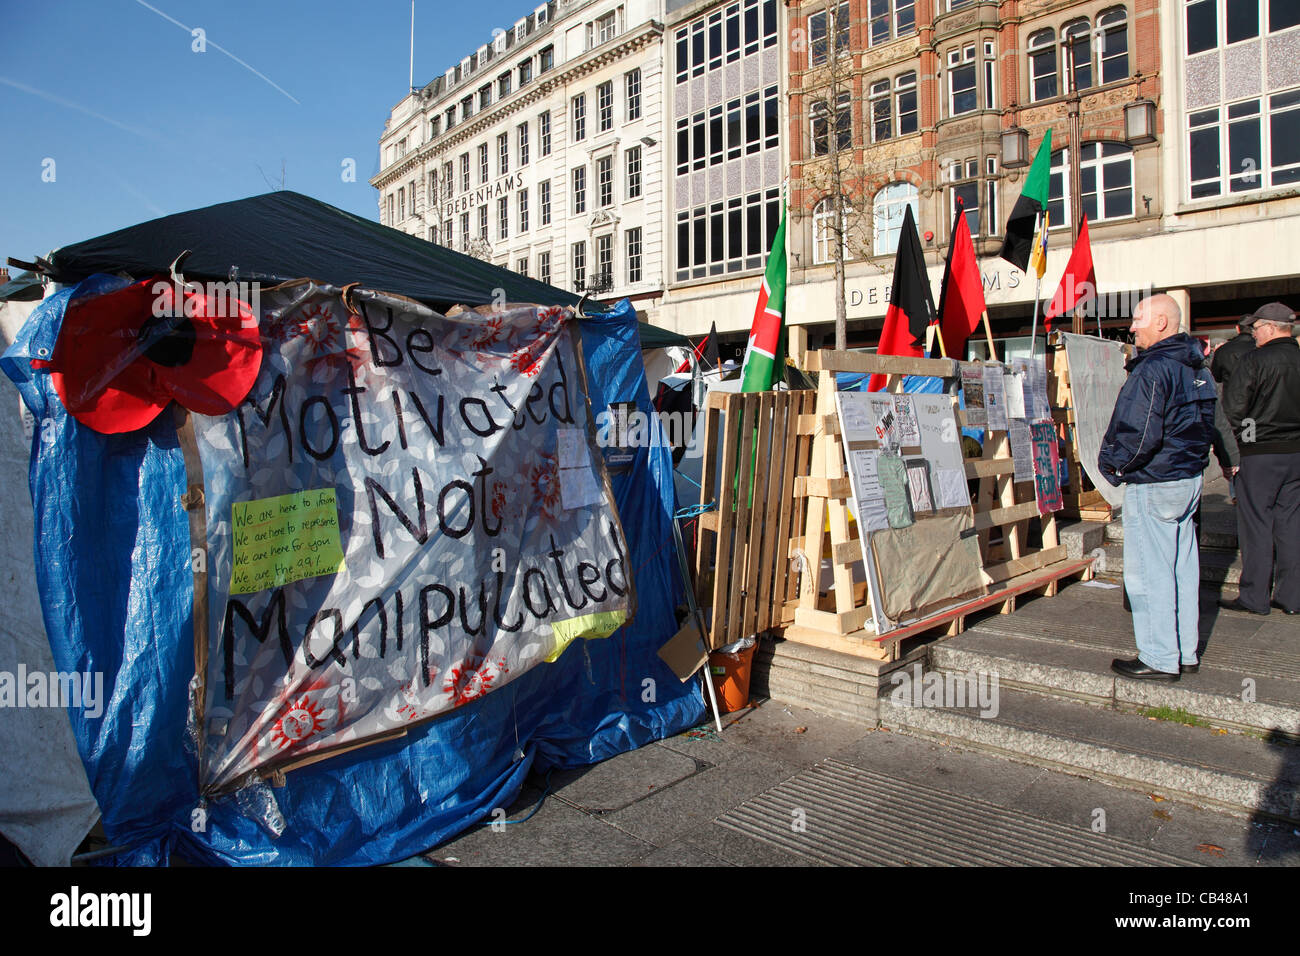 The Occupy Notts anti-capitalism protest camp in the Old Market Square, Nottingham, England, U.K. Stock Photo